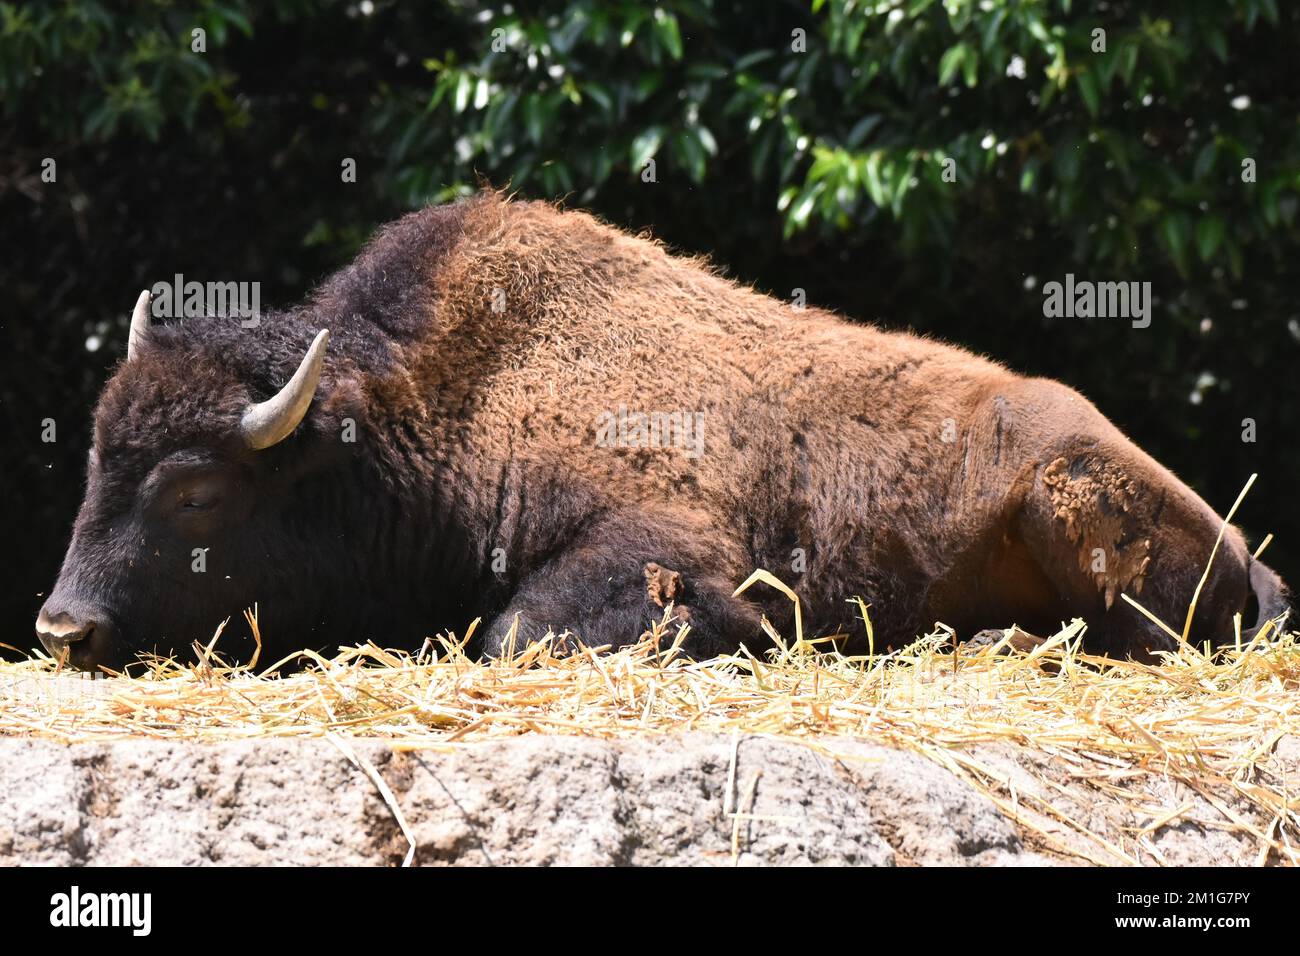 Non Exclusive: An American Bison species  seen in its habitat during a species conservation program, the zoo has 1803 animals in captivity at Chapulte Stock Photo